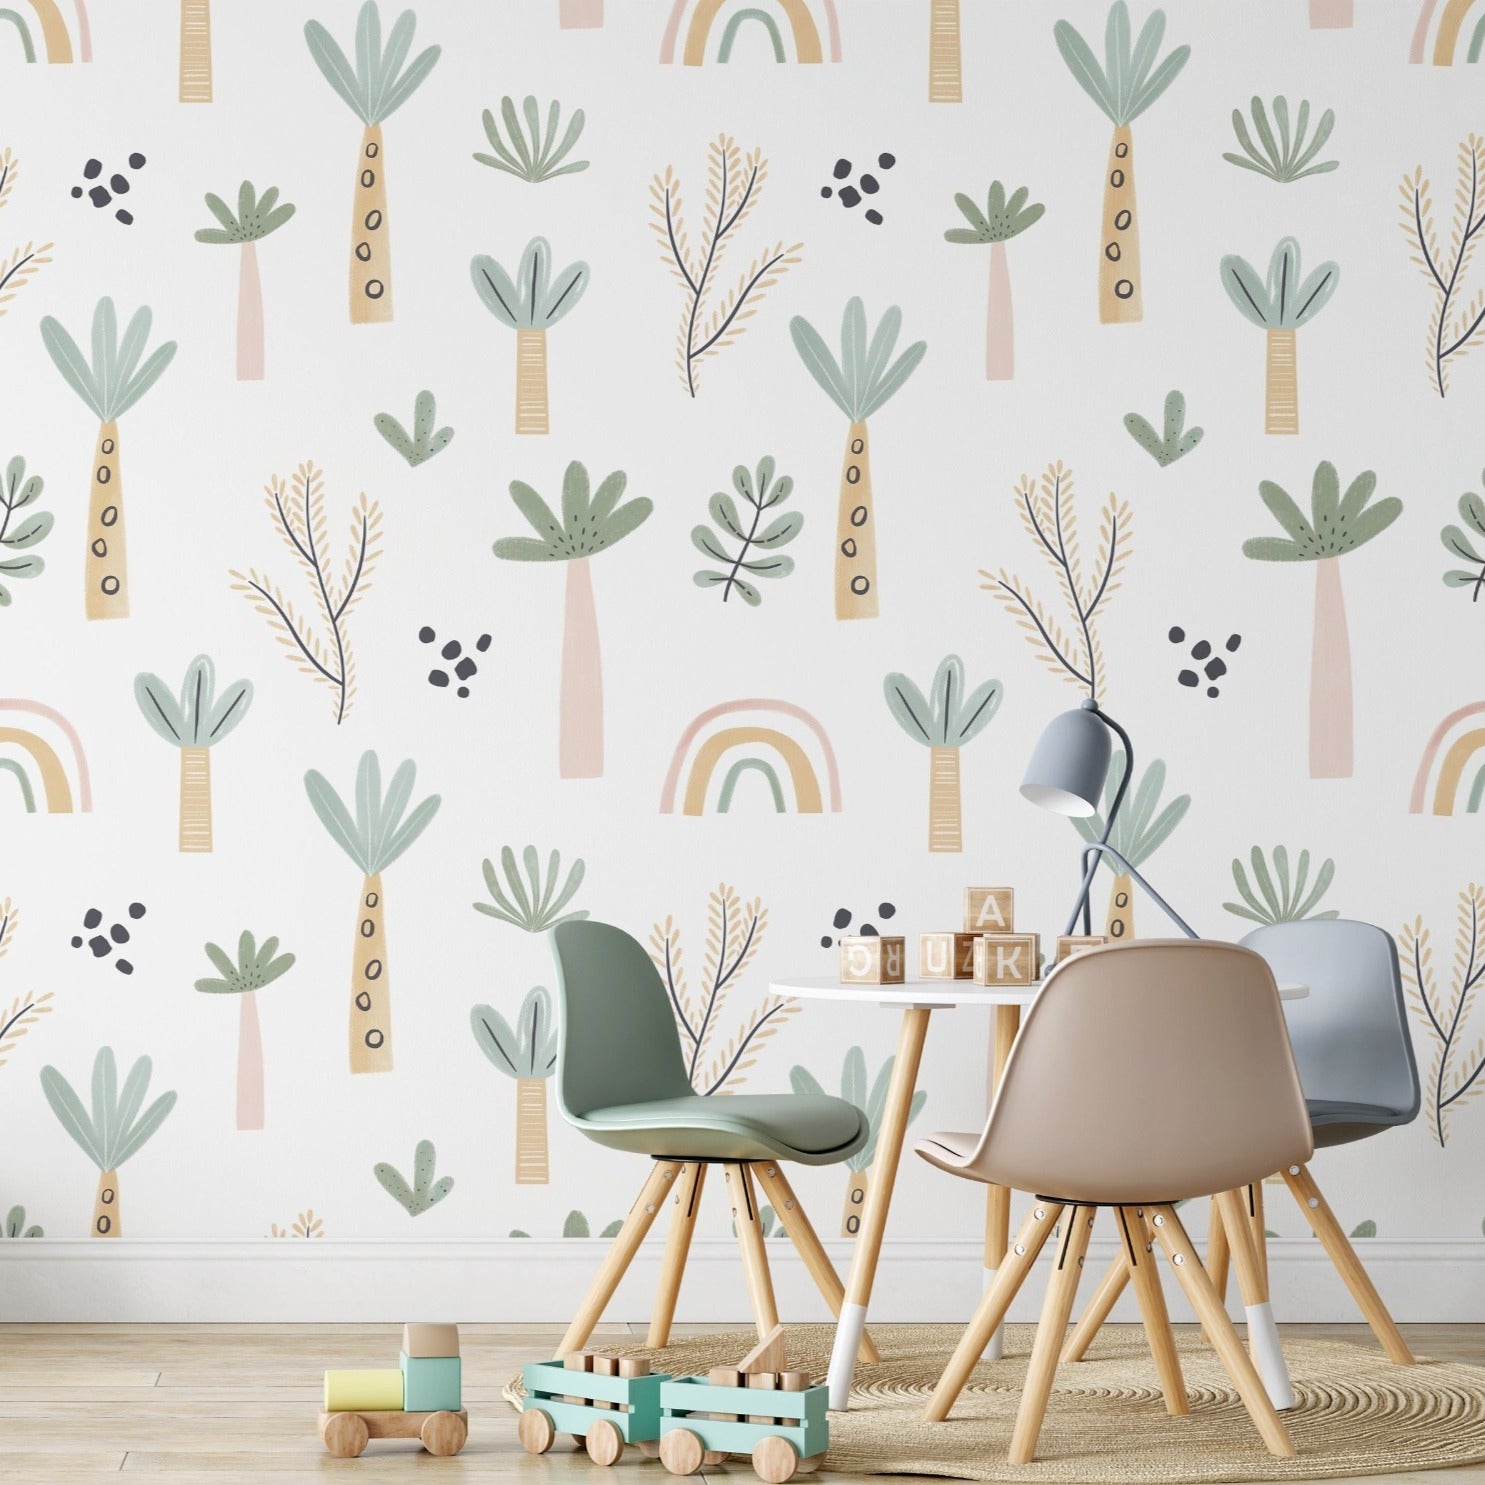 A cheerful children's room brightened by the Tropical Kids Room Wallpaper, depicting stylized trees and playful shapes. The room includes a small wooden desk with modern children's chairs in pastel colors, enhancing the playful atmosphere.